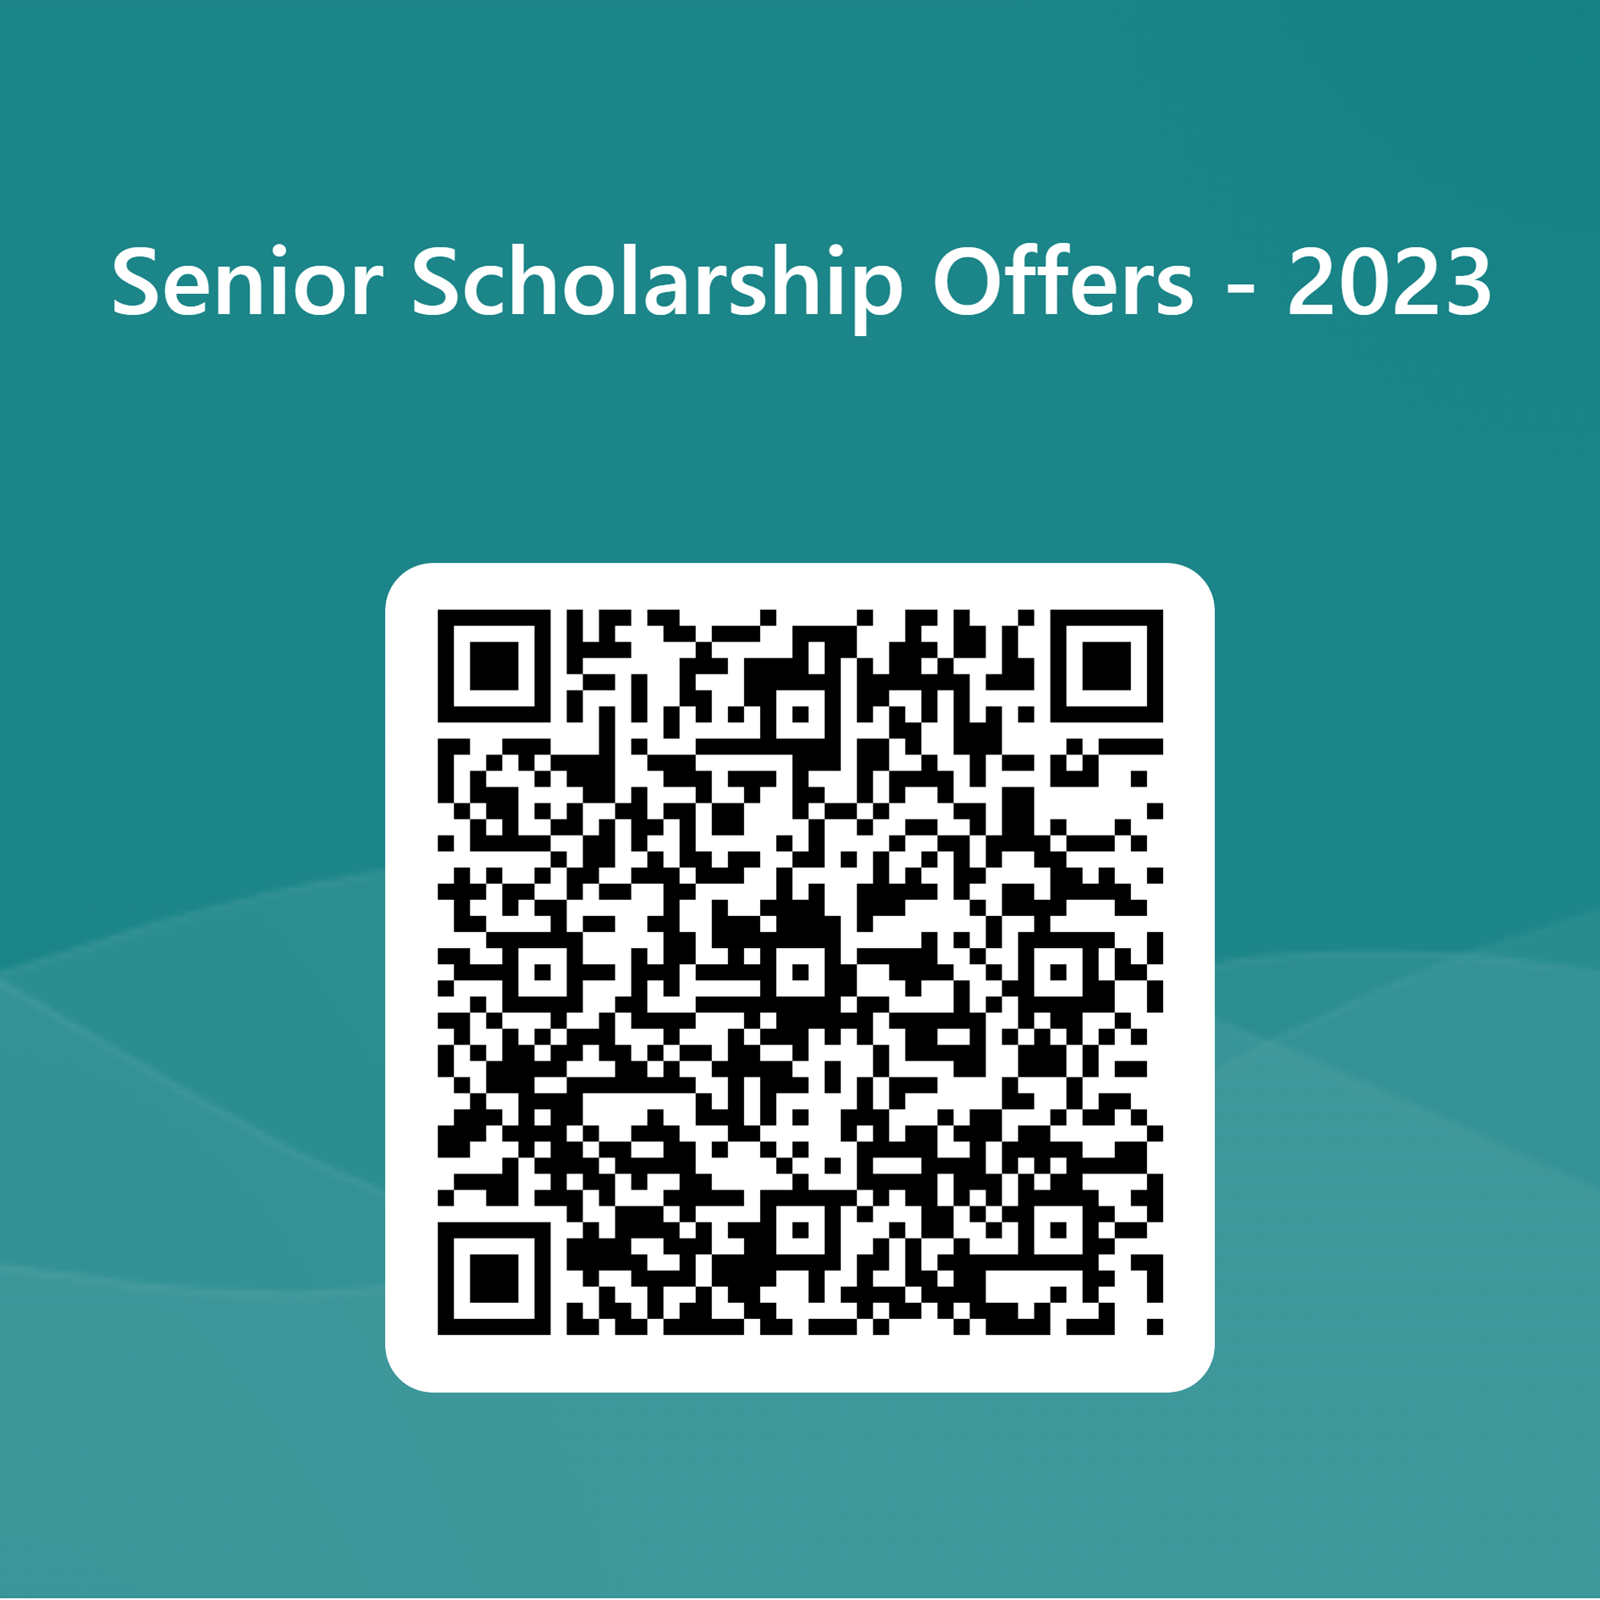 QRCode%20for%20Senior%20Scholarship%20Offers%20-%202023.png